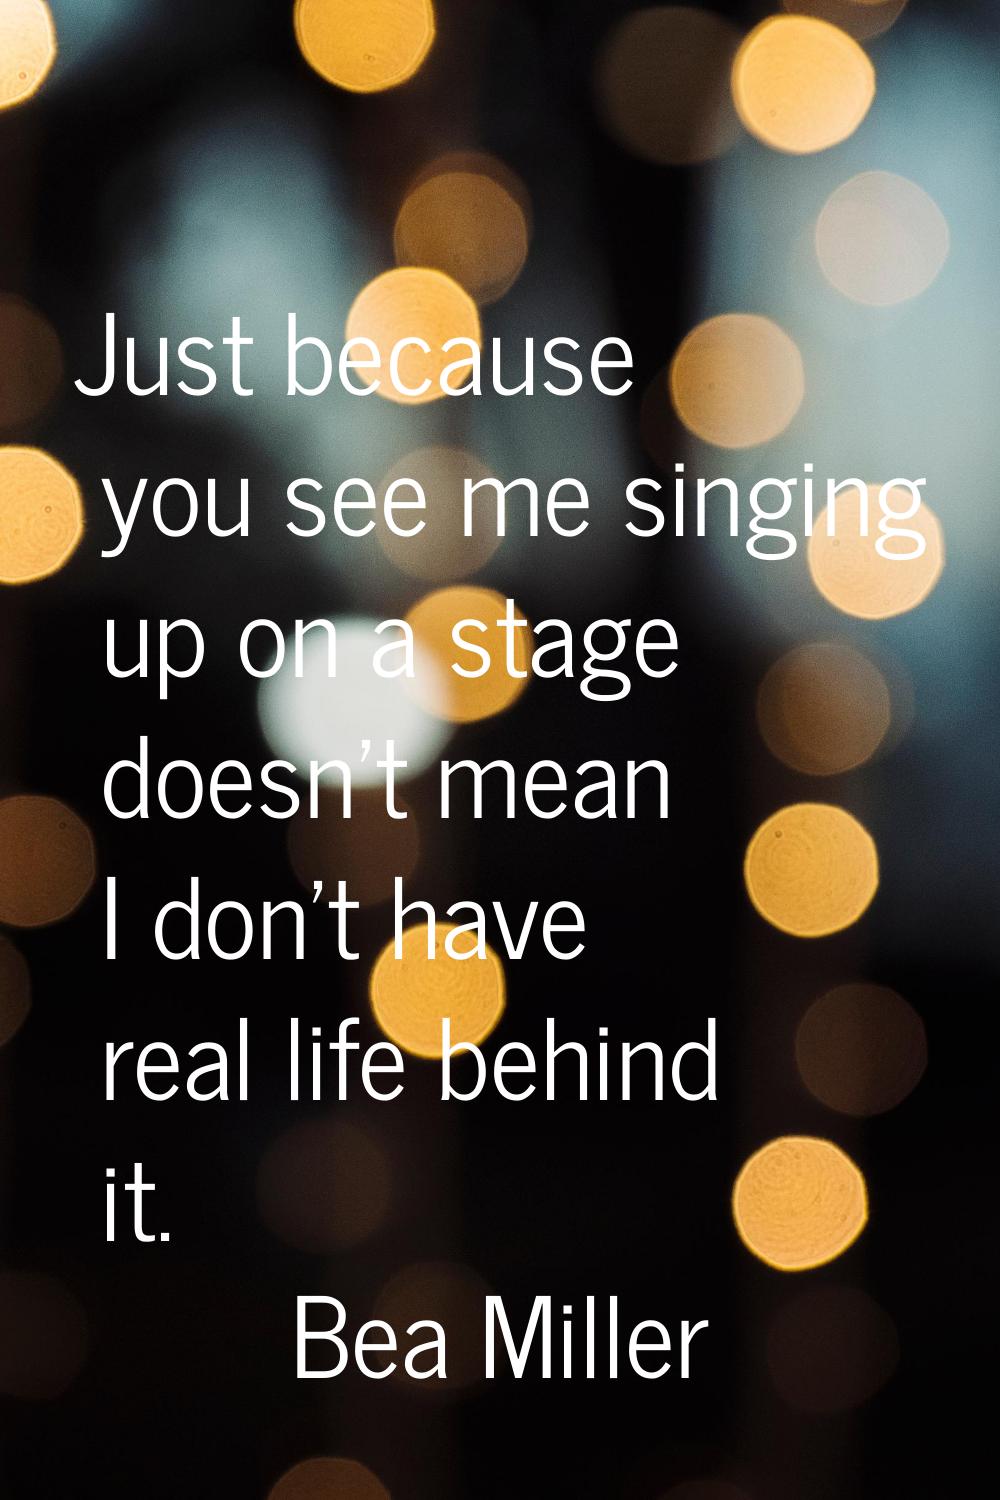 Just because you see me singing up on a stage doesn't mean I don't have real life behind it.